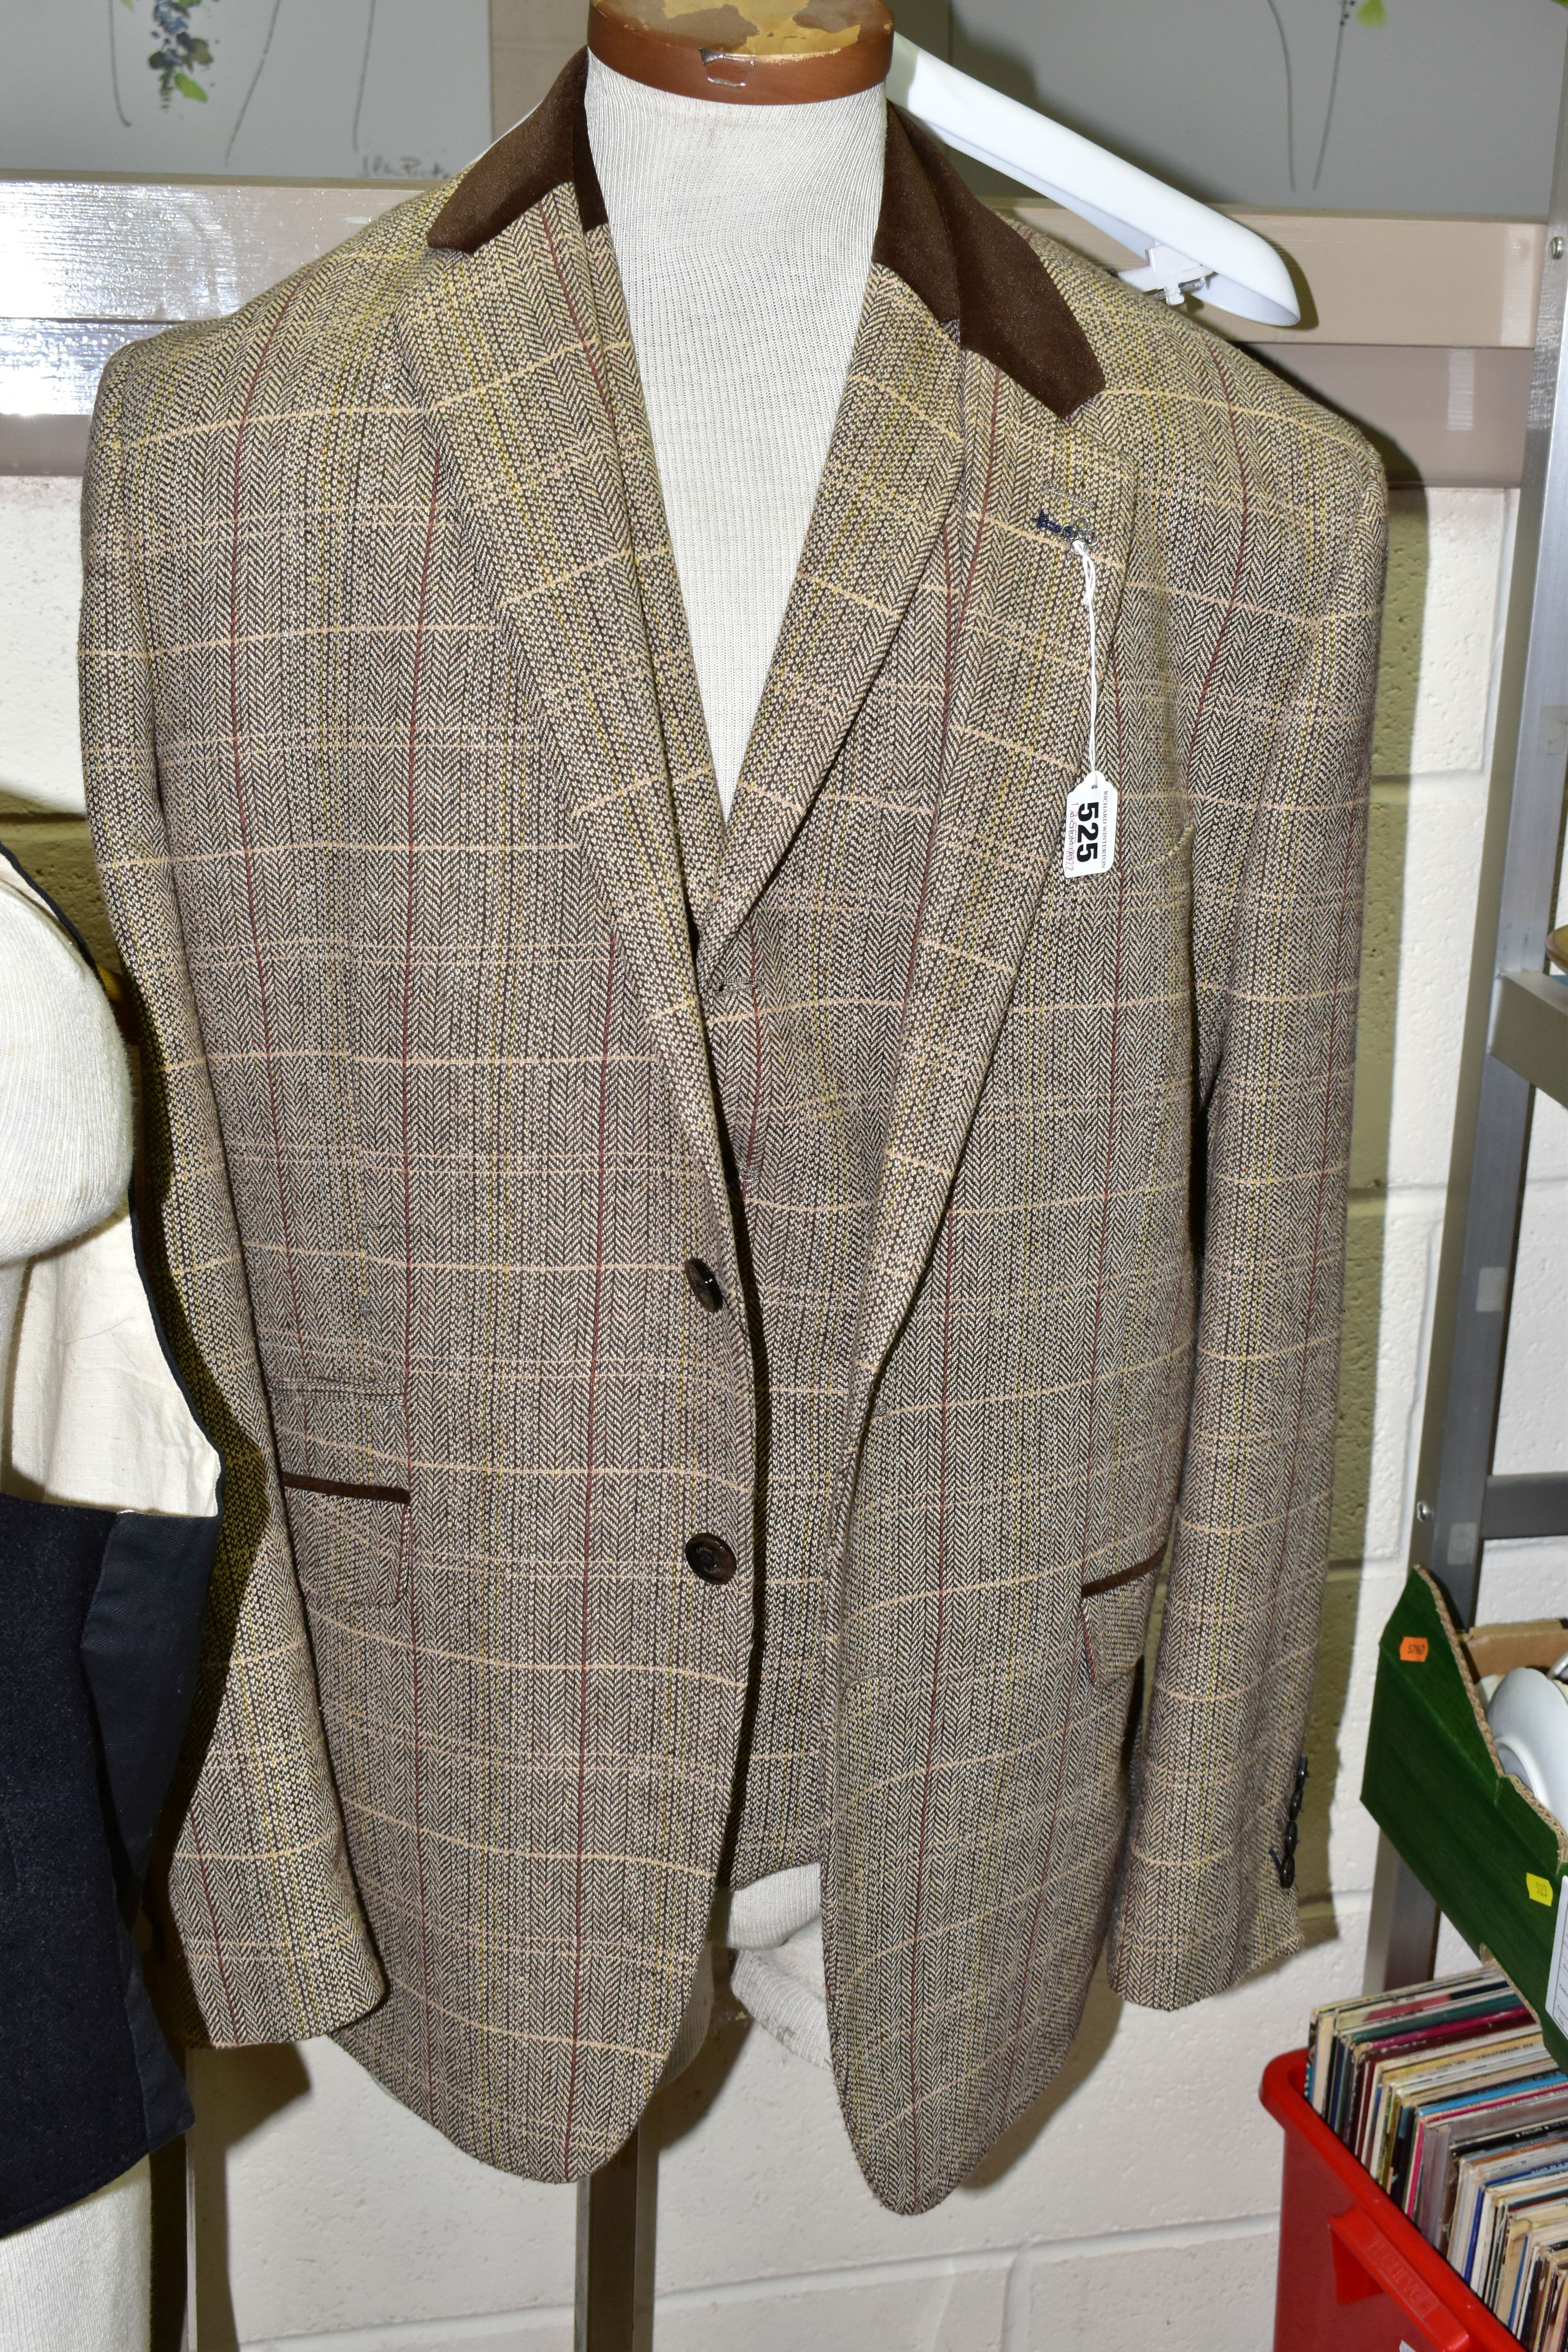 A HOUSE OF CAVANI THREE PIECE SUIT, comprising jacket, trousers and waist coat in a brown tweed-